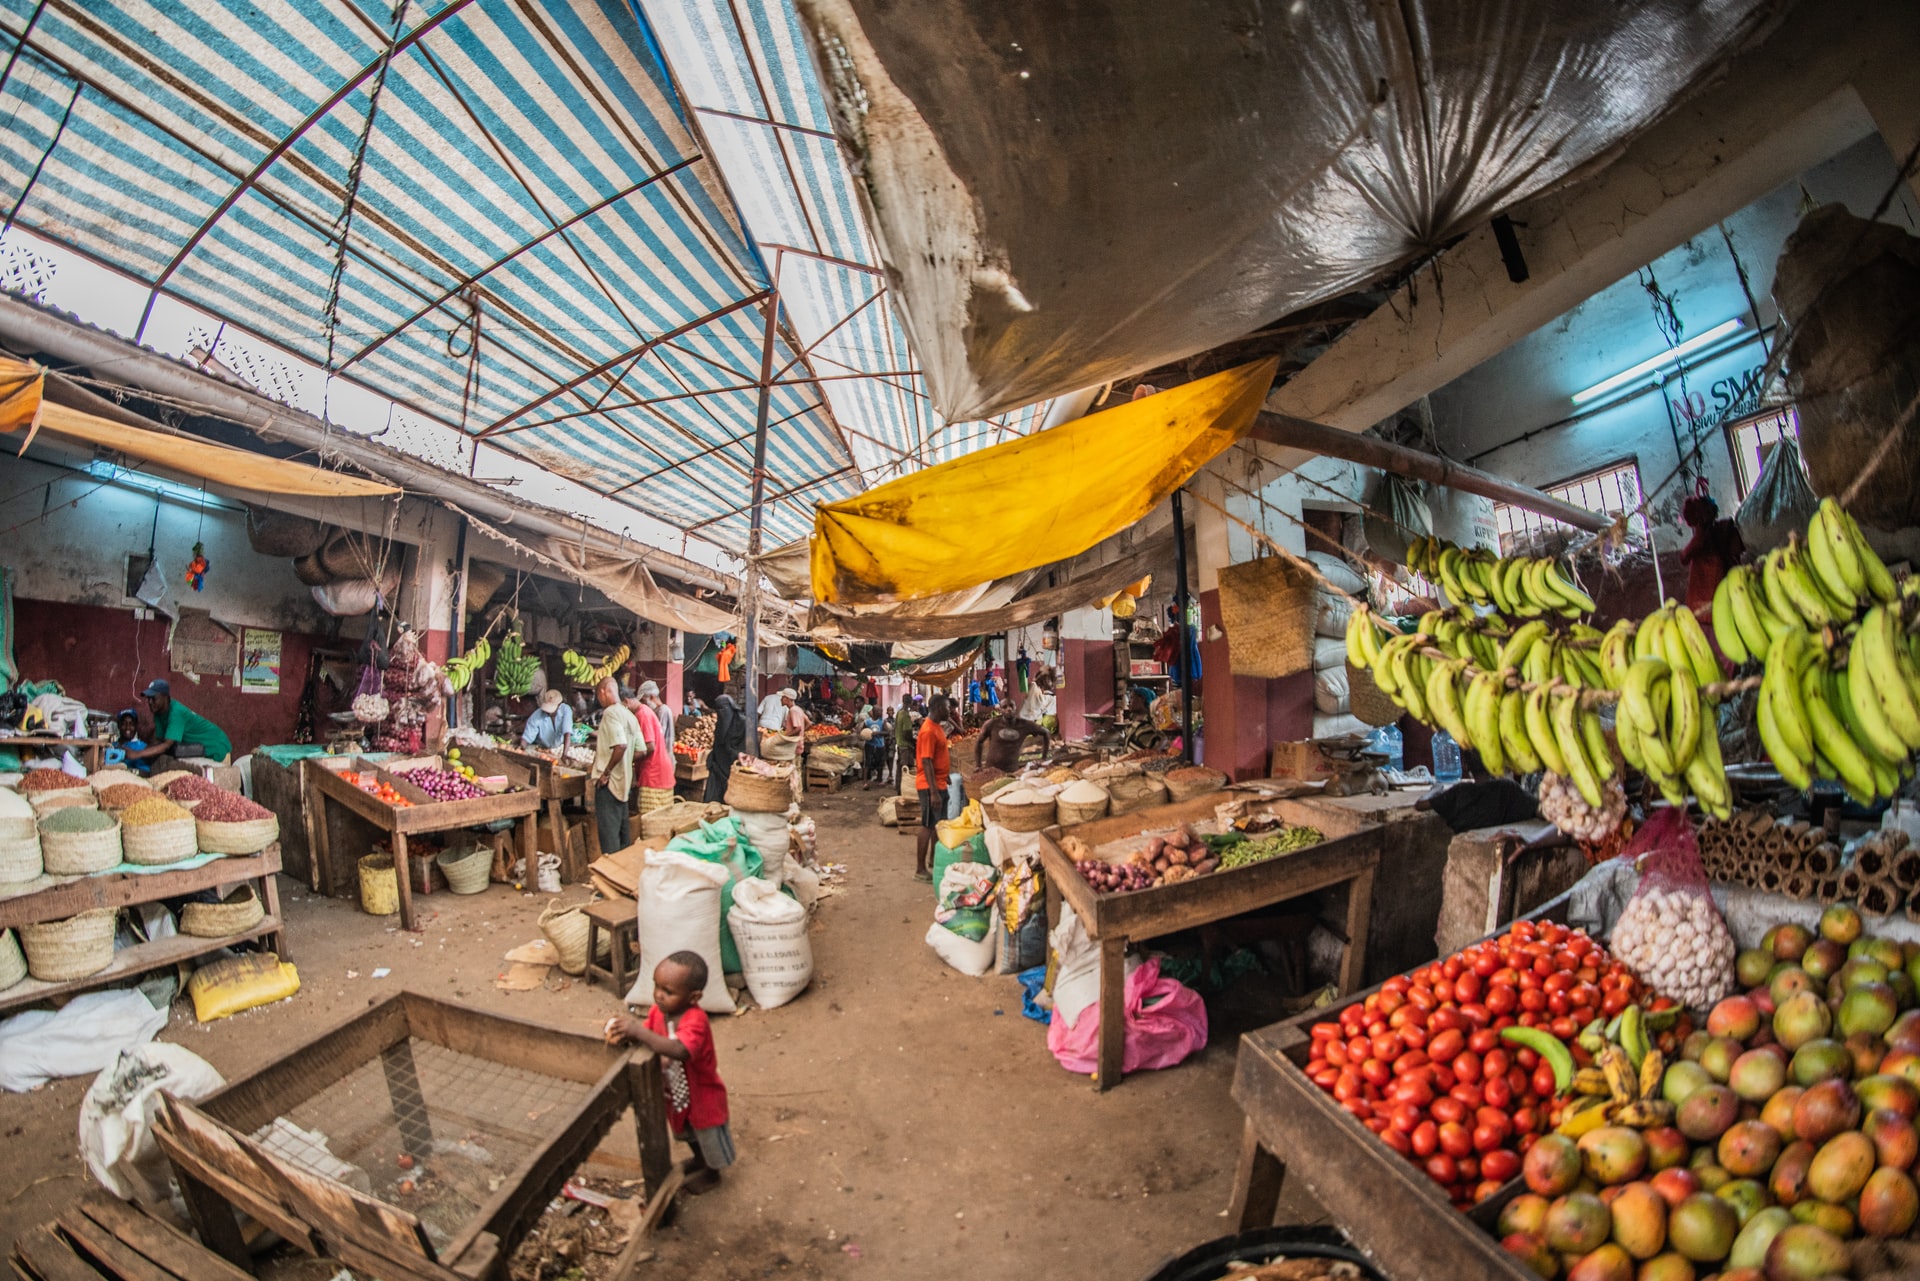 photo of a fruit market, with fruit and spices for sale in tents